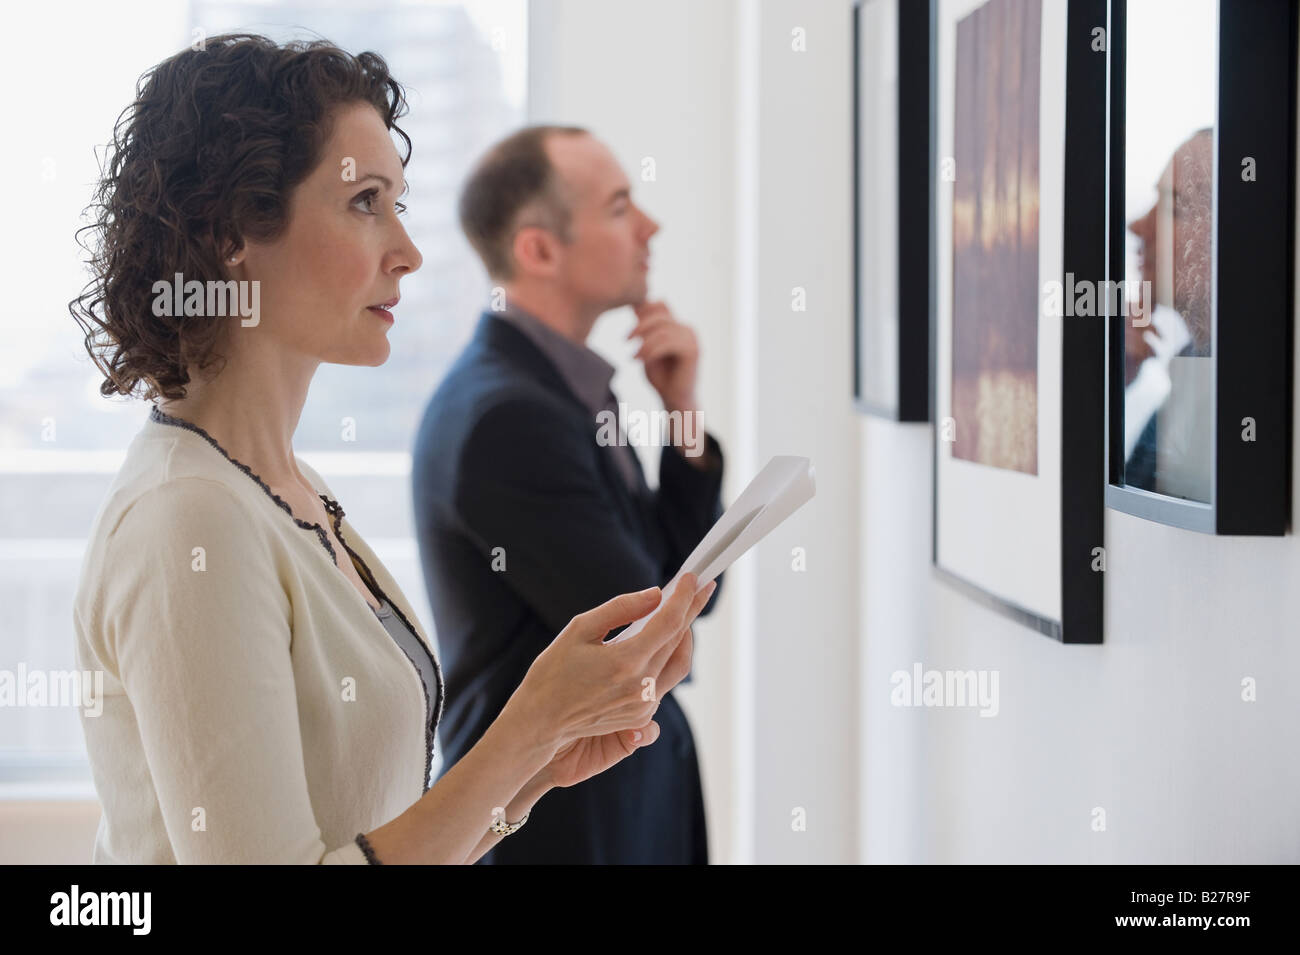 Couple looking at art in art gallery Stock Photo